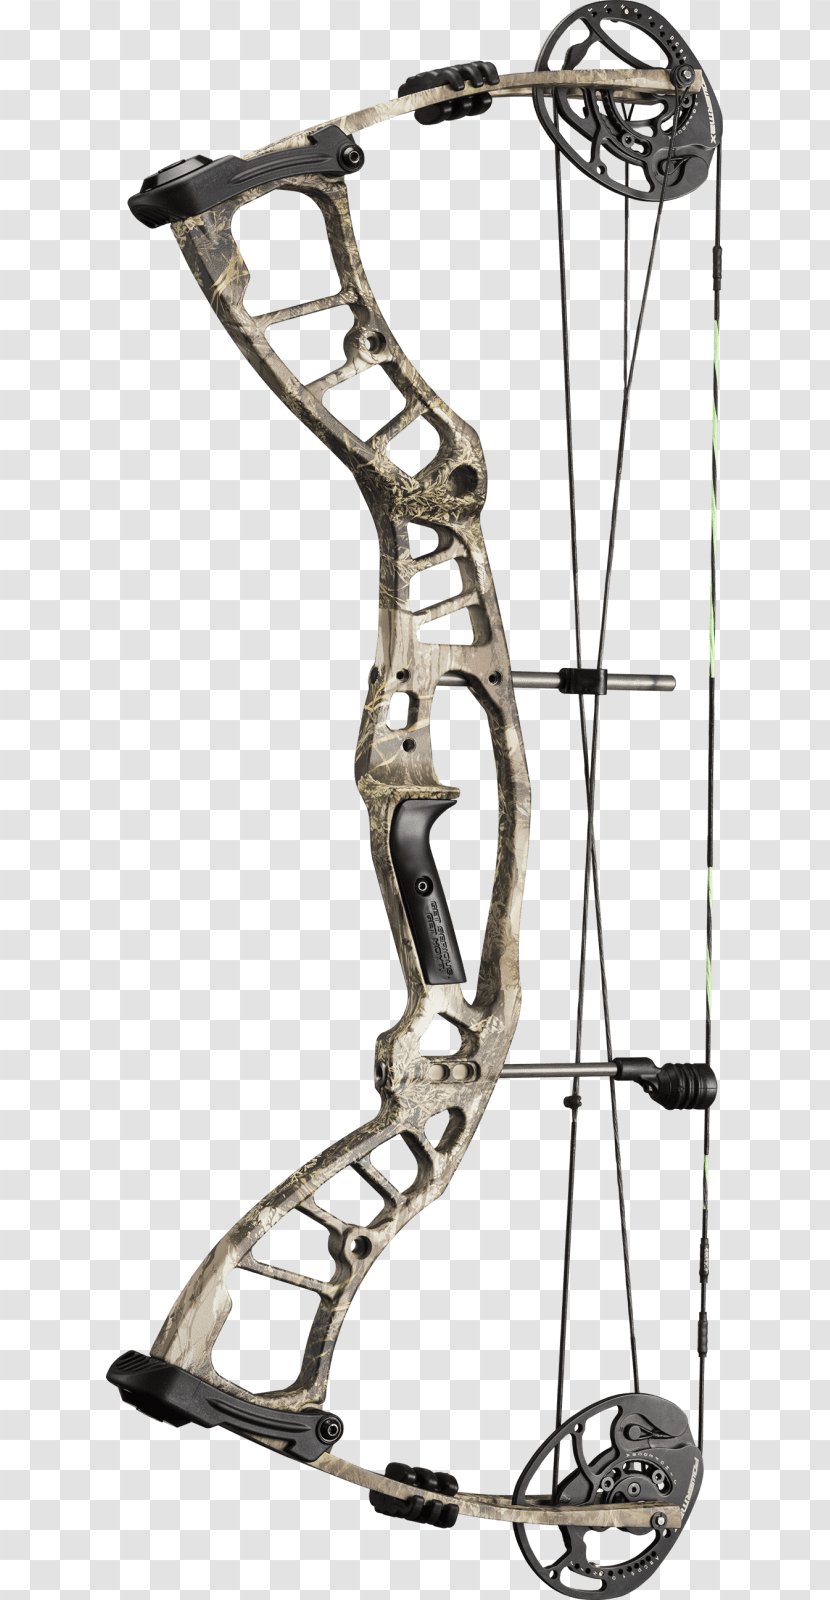 Compound Bows Bow And Arrow Archery Bowhunting - Price - Puppies Transparent PNG